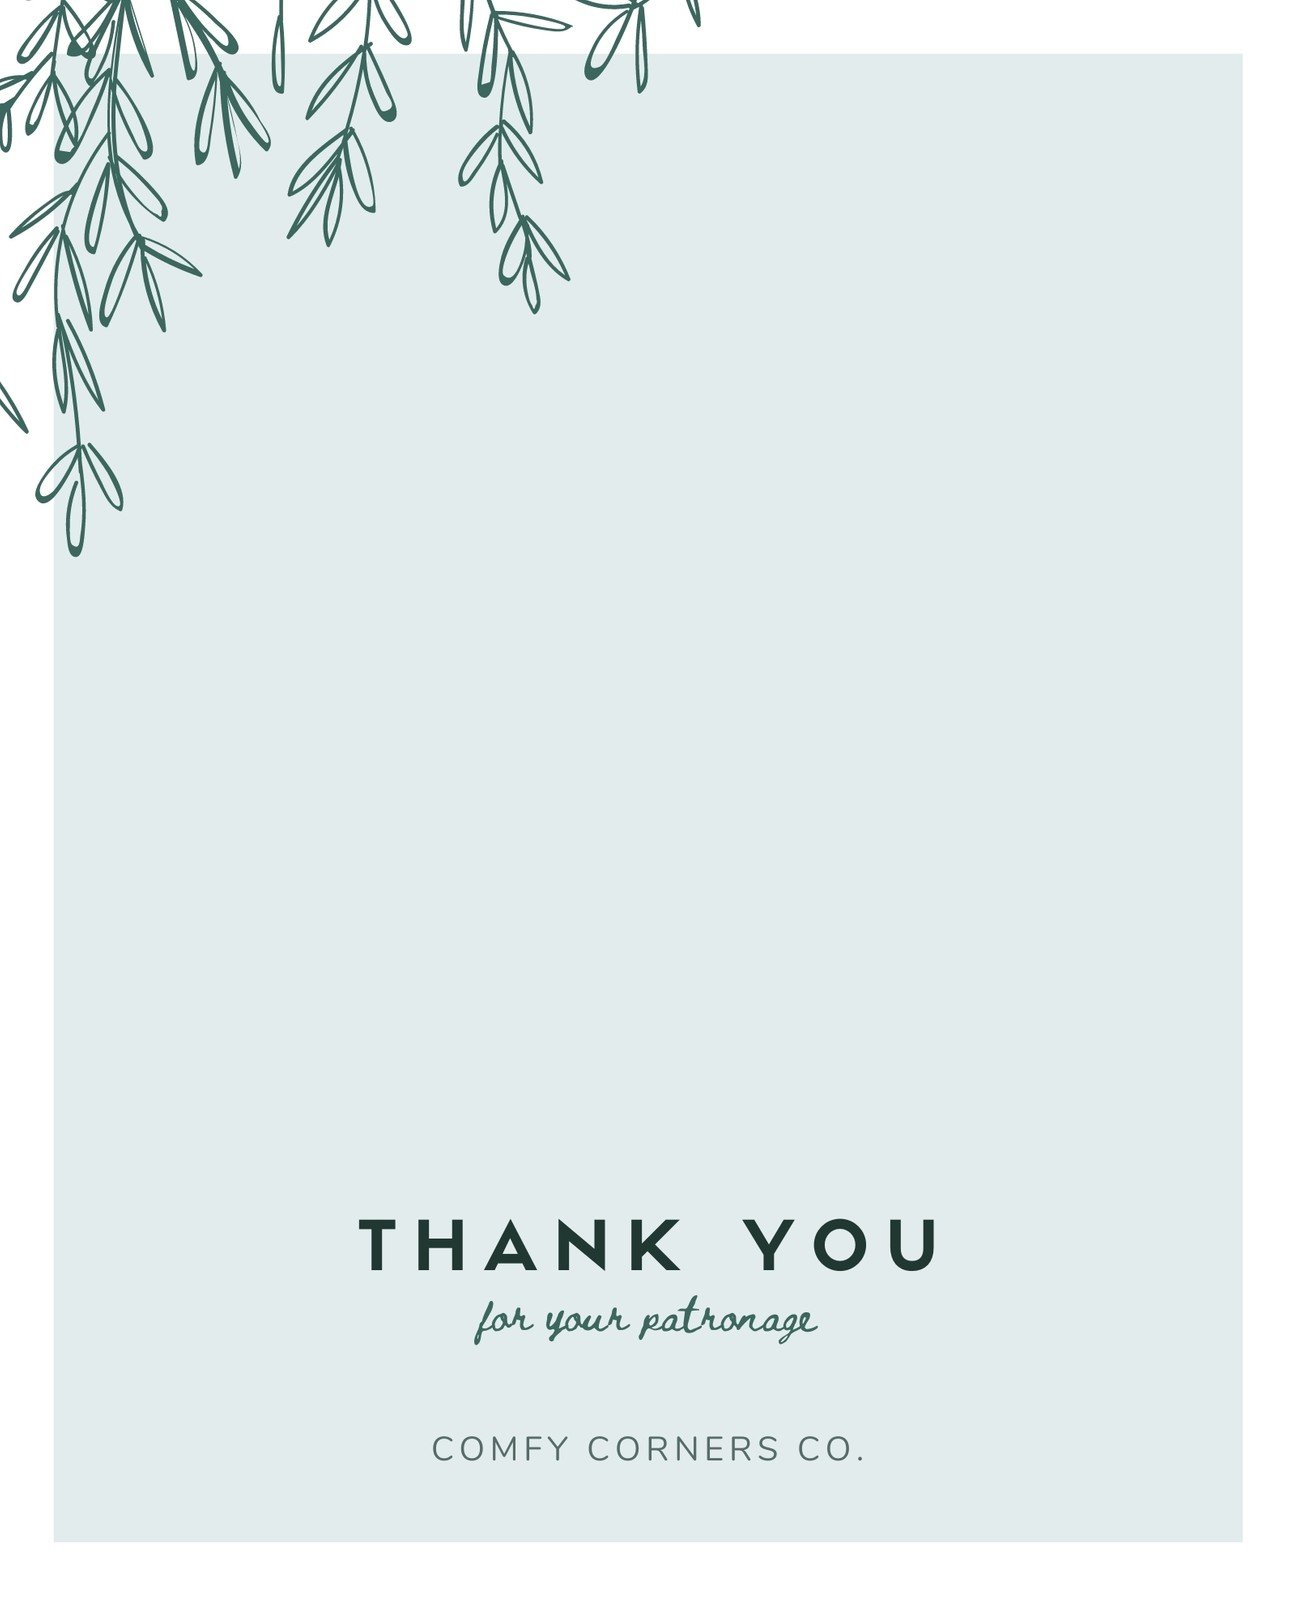 Green Vines Business Thank You Note Card - Templates by Canva Pertaining To Thank You Note Cards Template